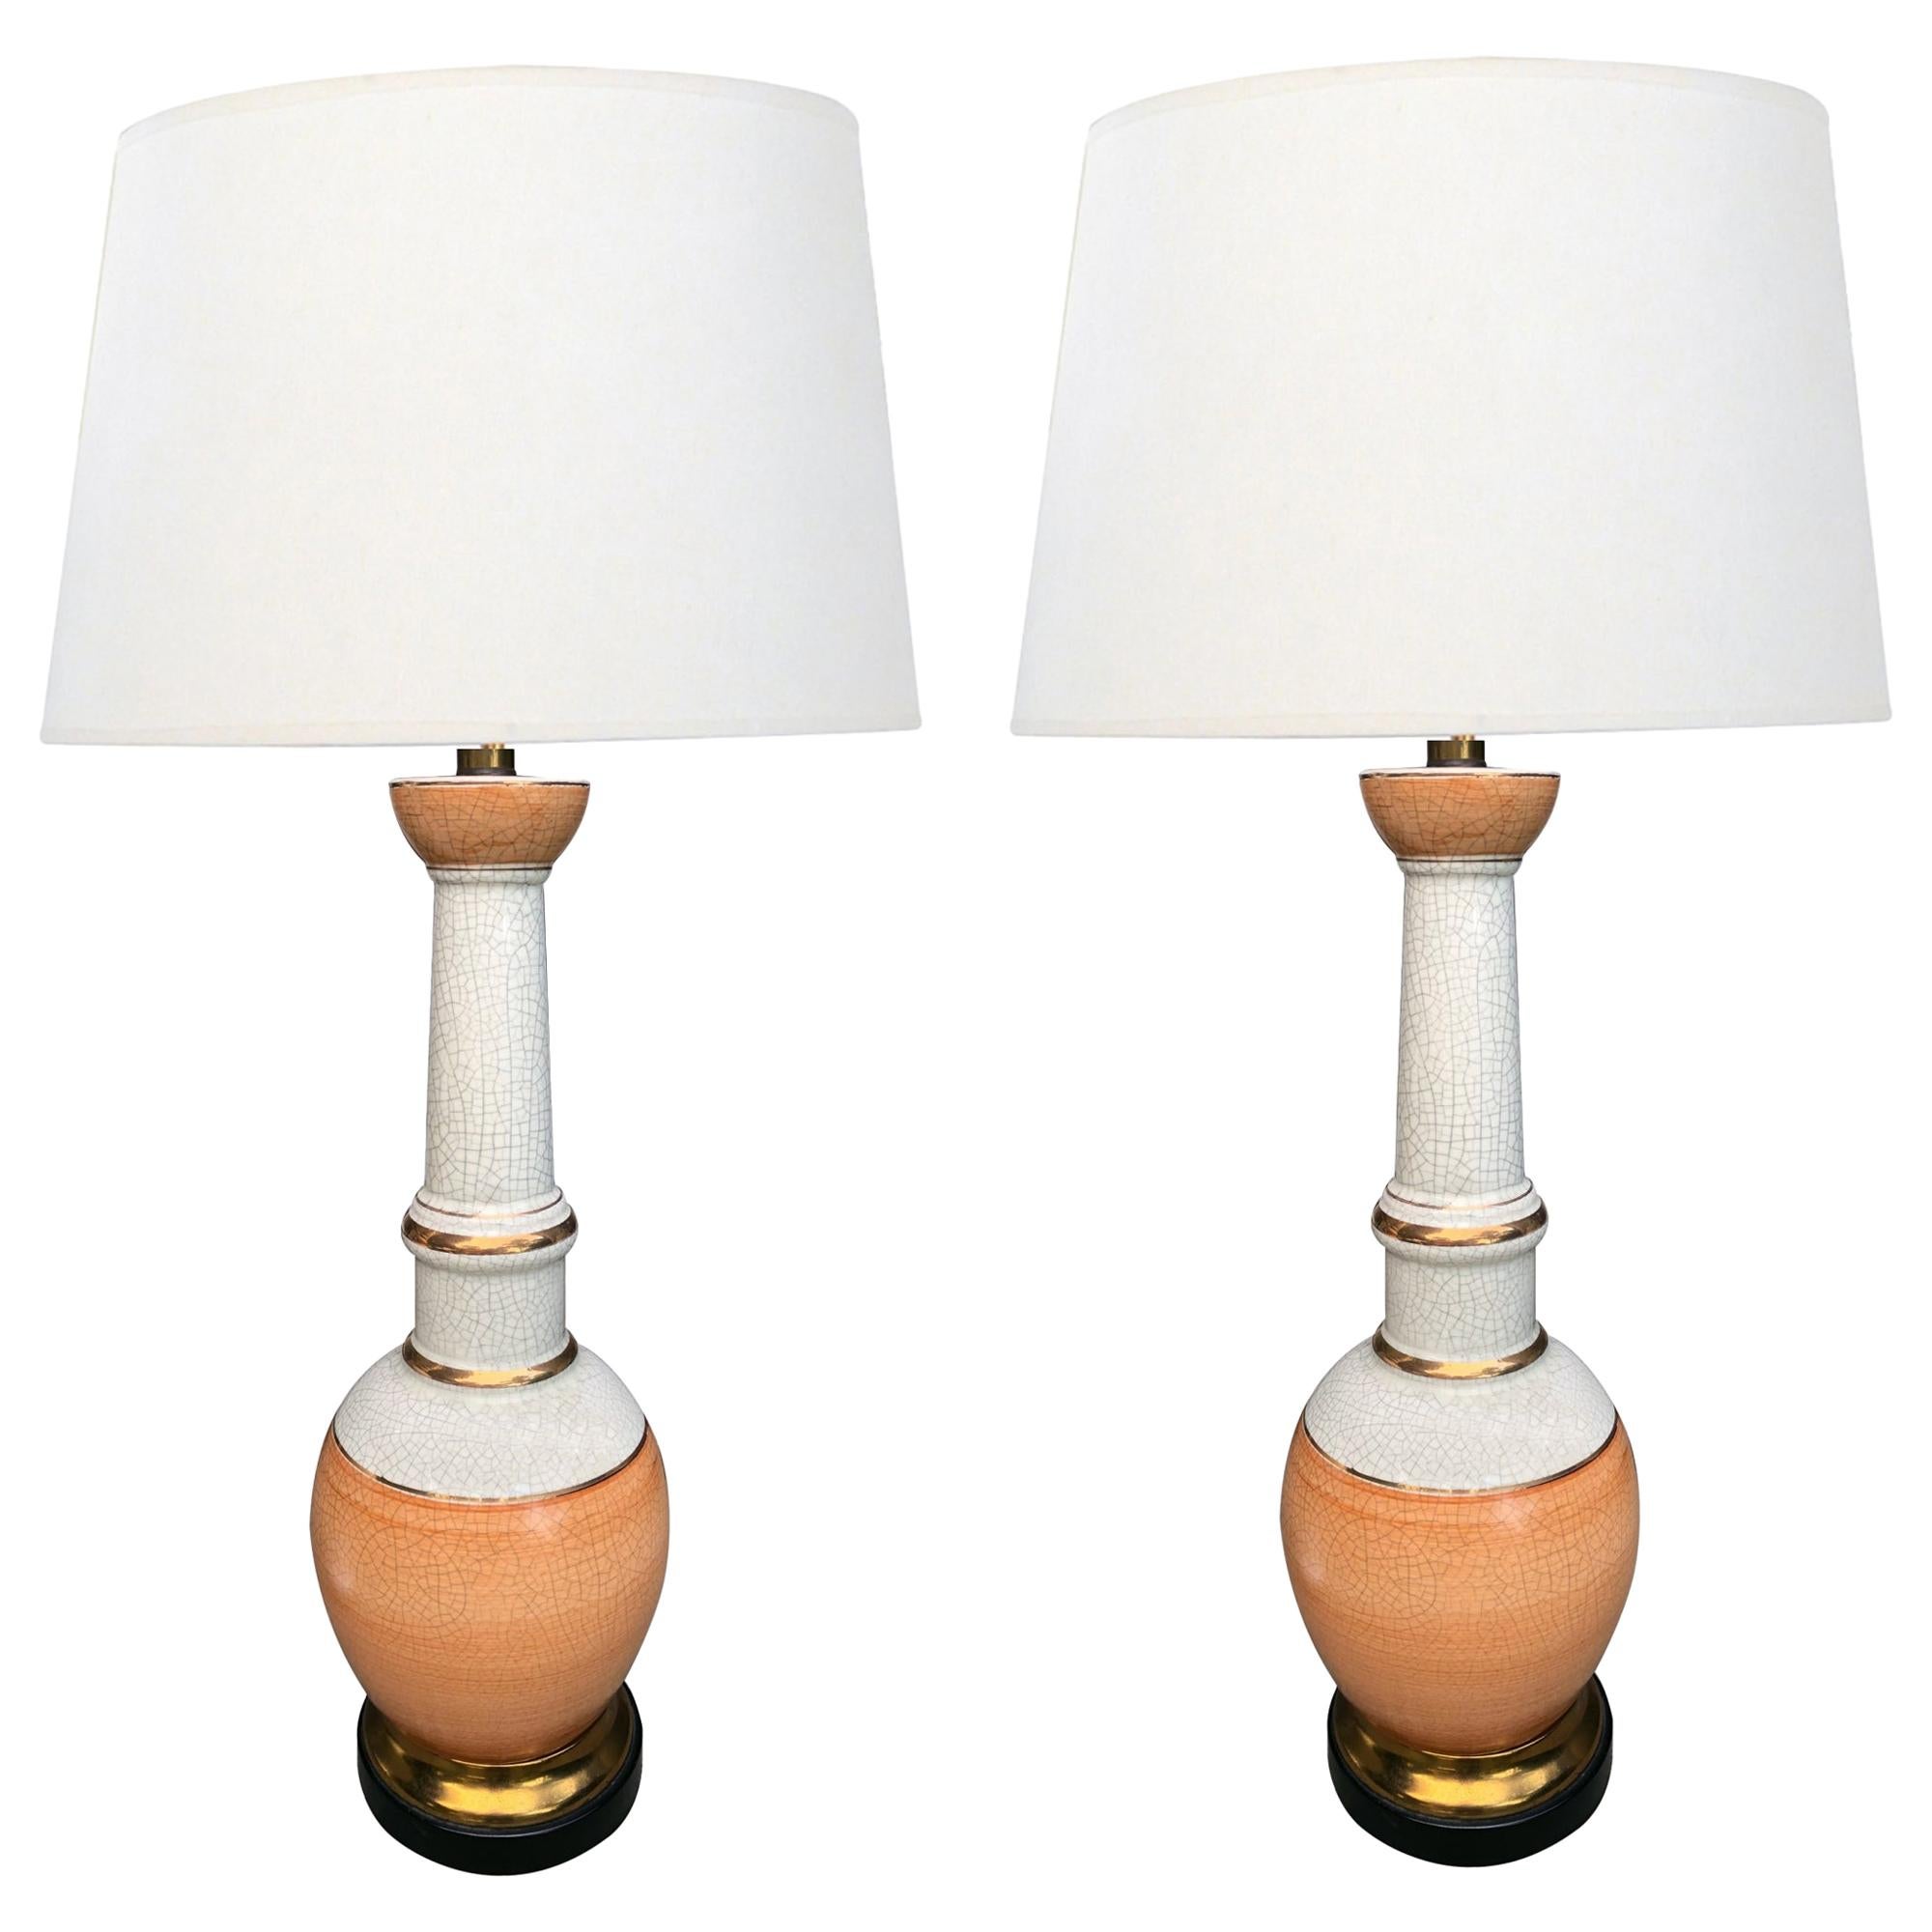 Stylish Pair of Frederick Cooper 1960s Peach and White Crackle-Glaze Lamps For Sale